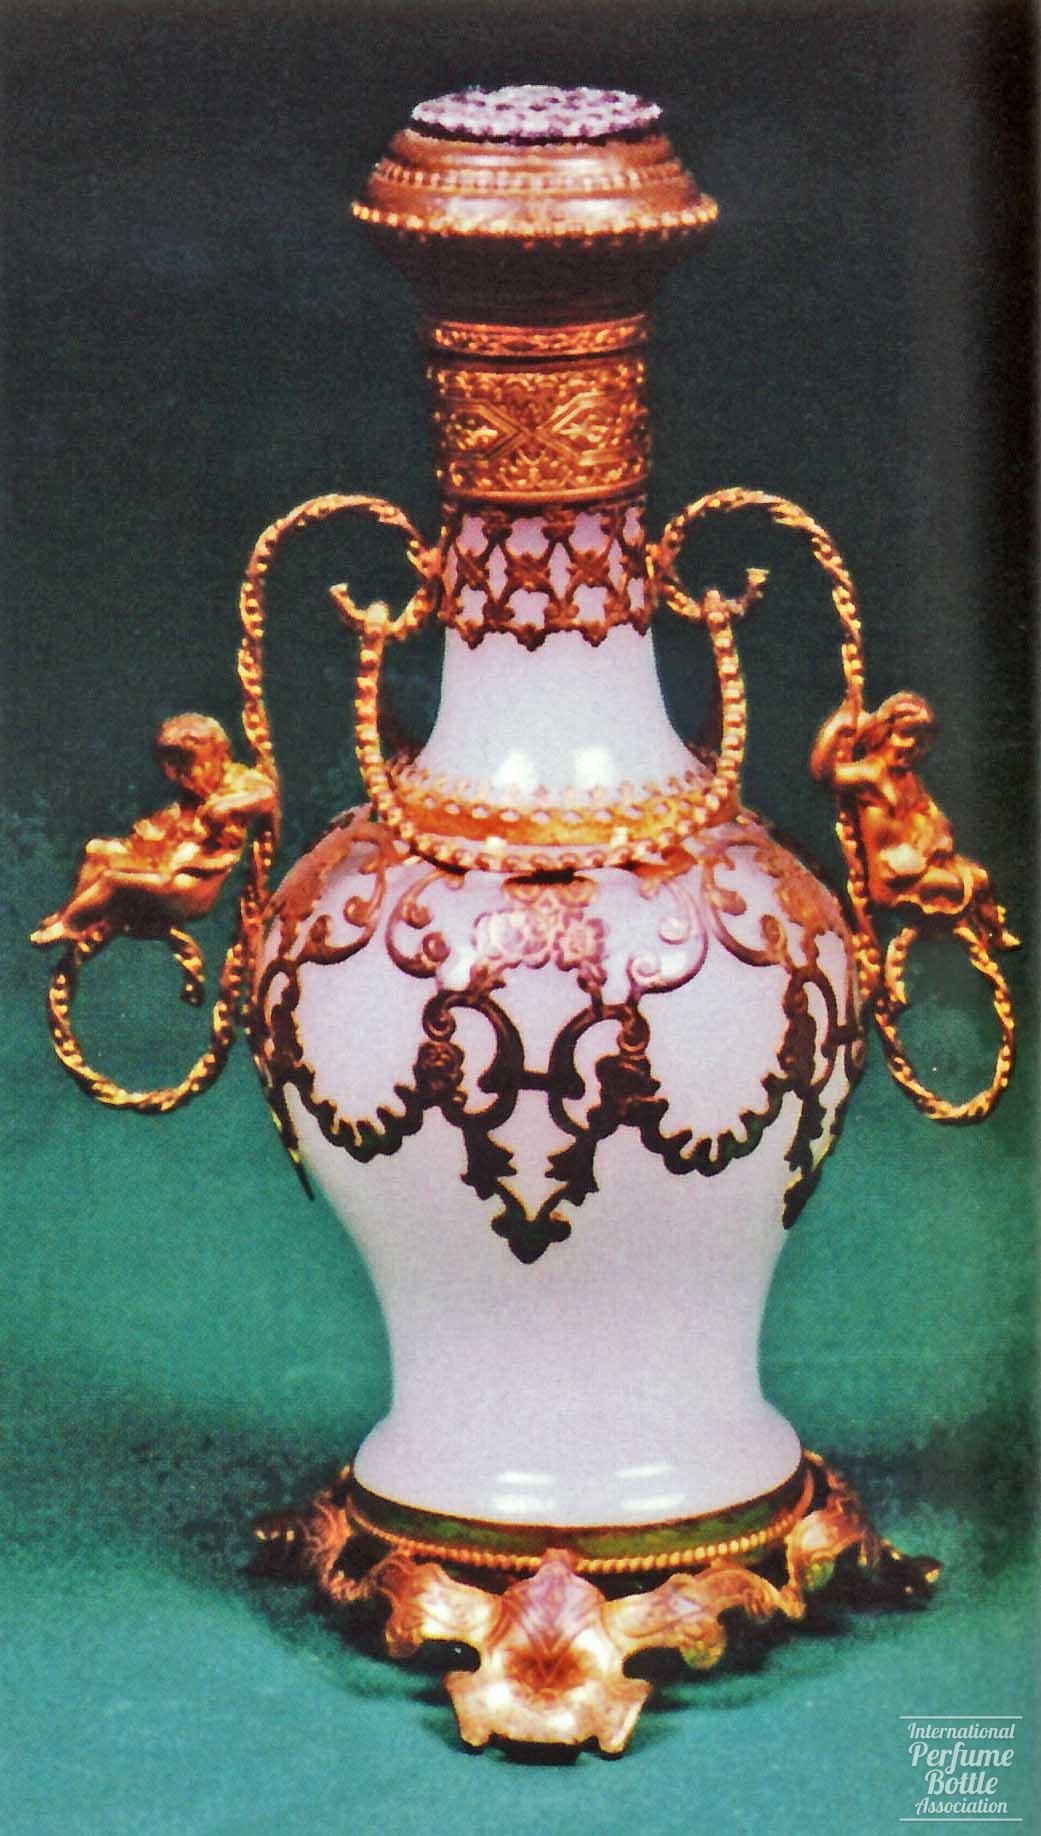 Opaque White Bottle With Metalwork and Cherubs